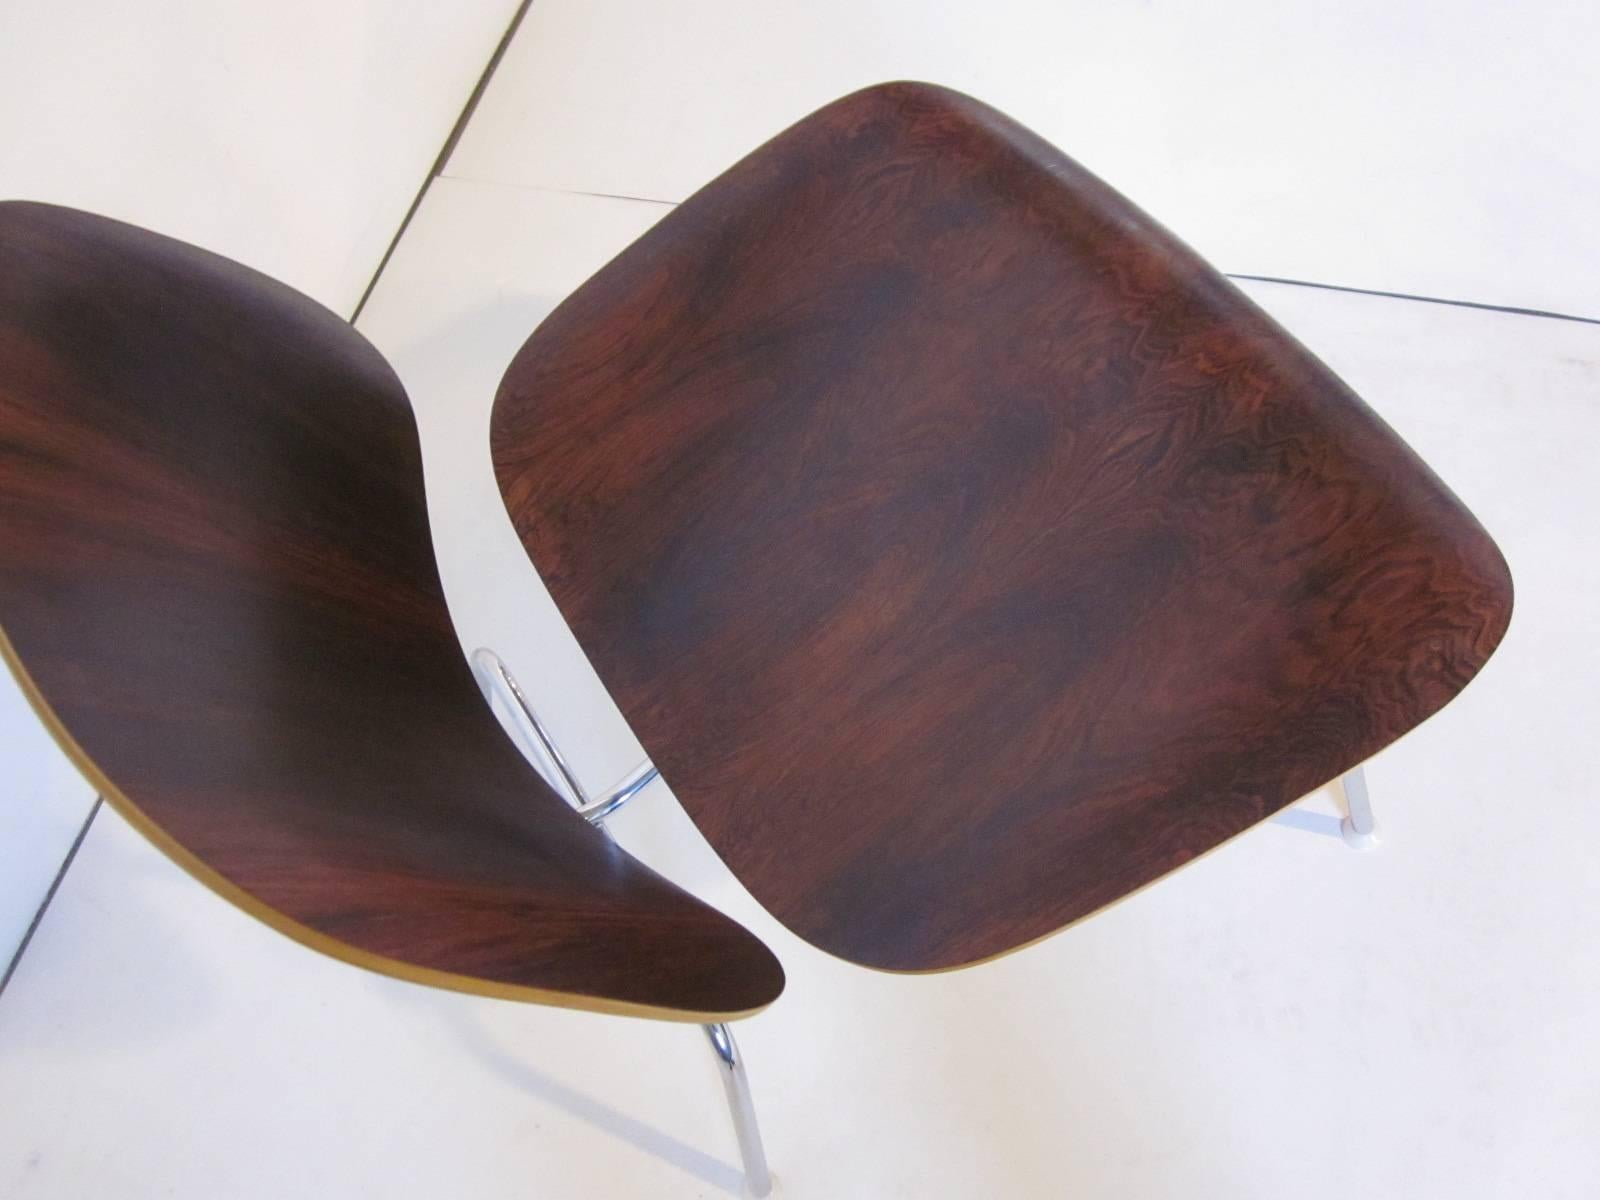 A rare special order Eames Brazilian rosewood LCM ( Lounge chair metal base ) the back and seat are in dark and rich rosewood sitting on a chromed steel base. Manufactured by the Herman Miller Company ,Zeeland Michigan. 